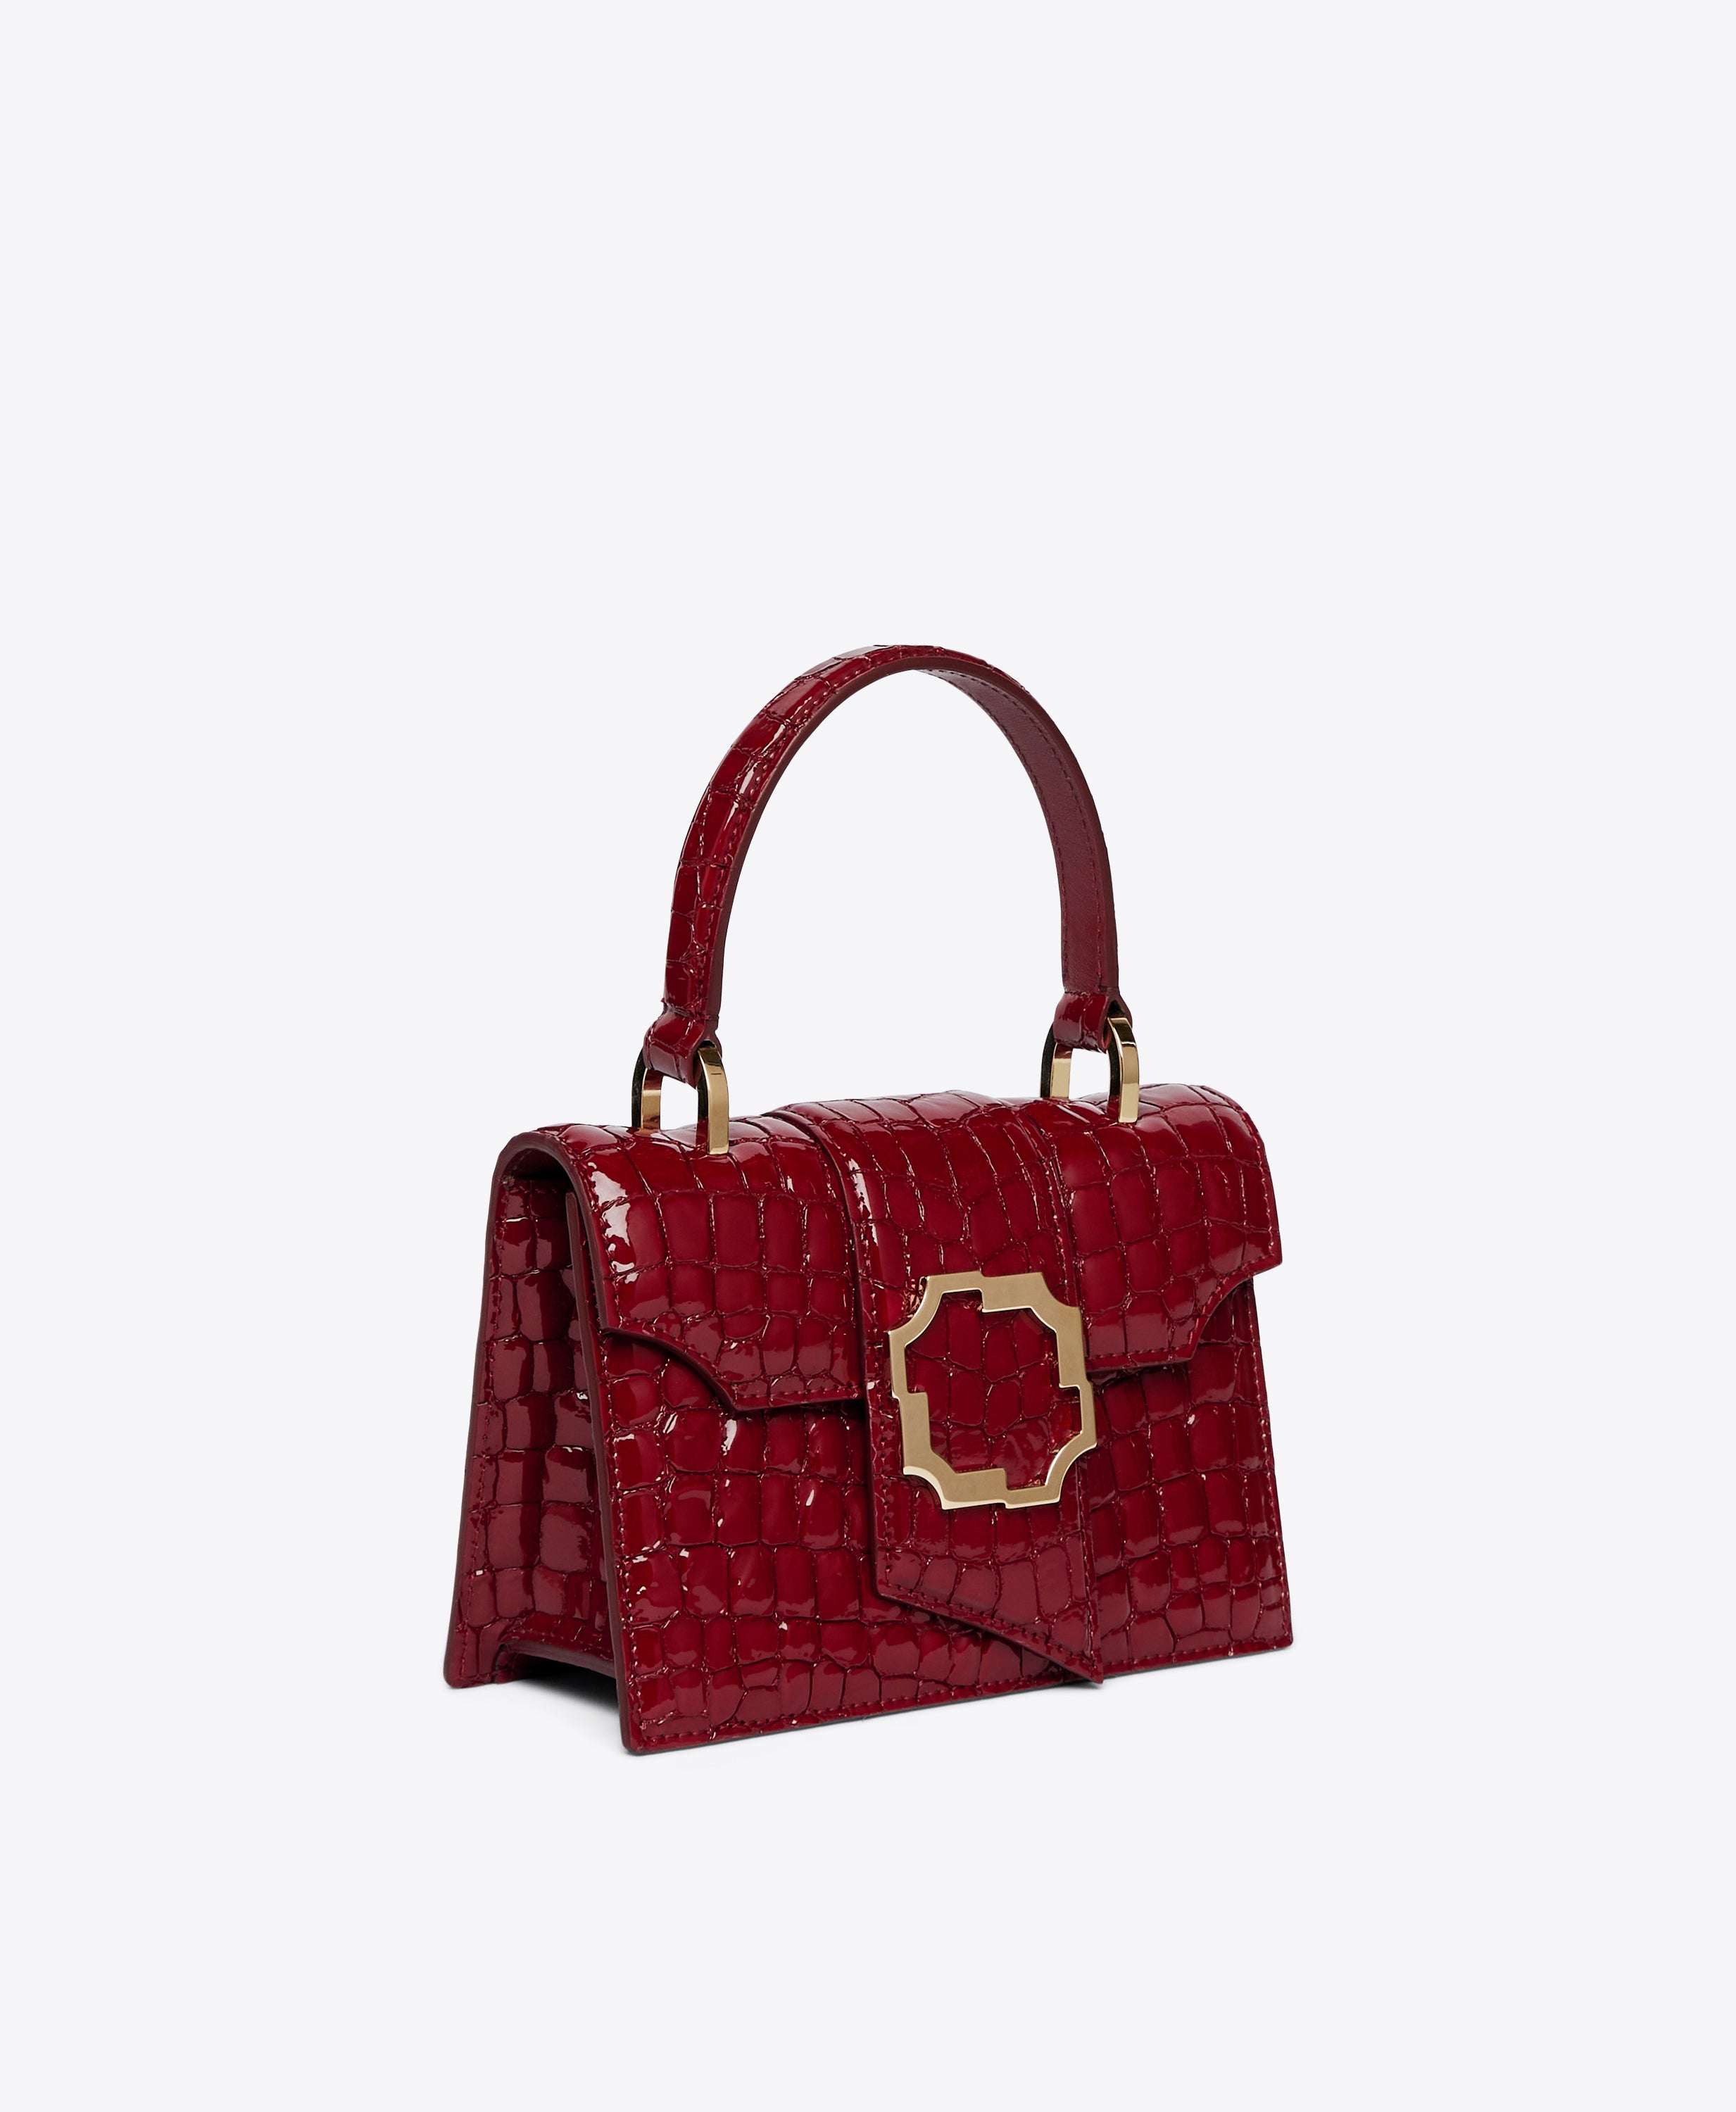 Women's Burgundy Embossed Patent Top Handle Bag with Crest Buckle